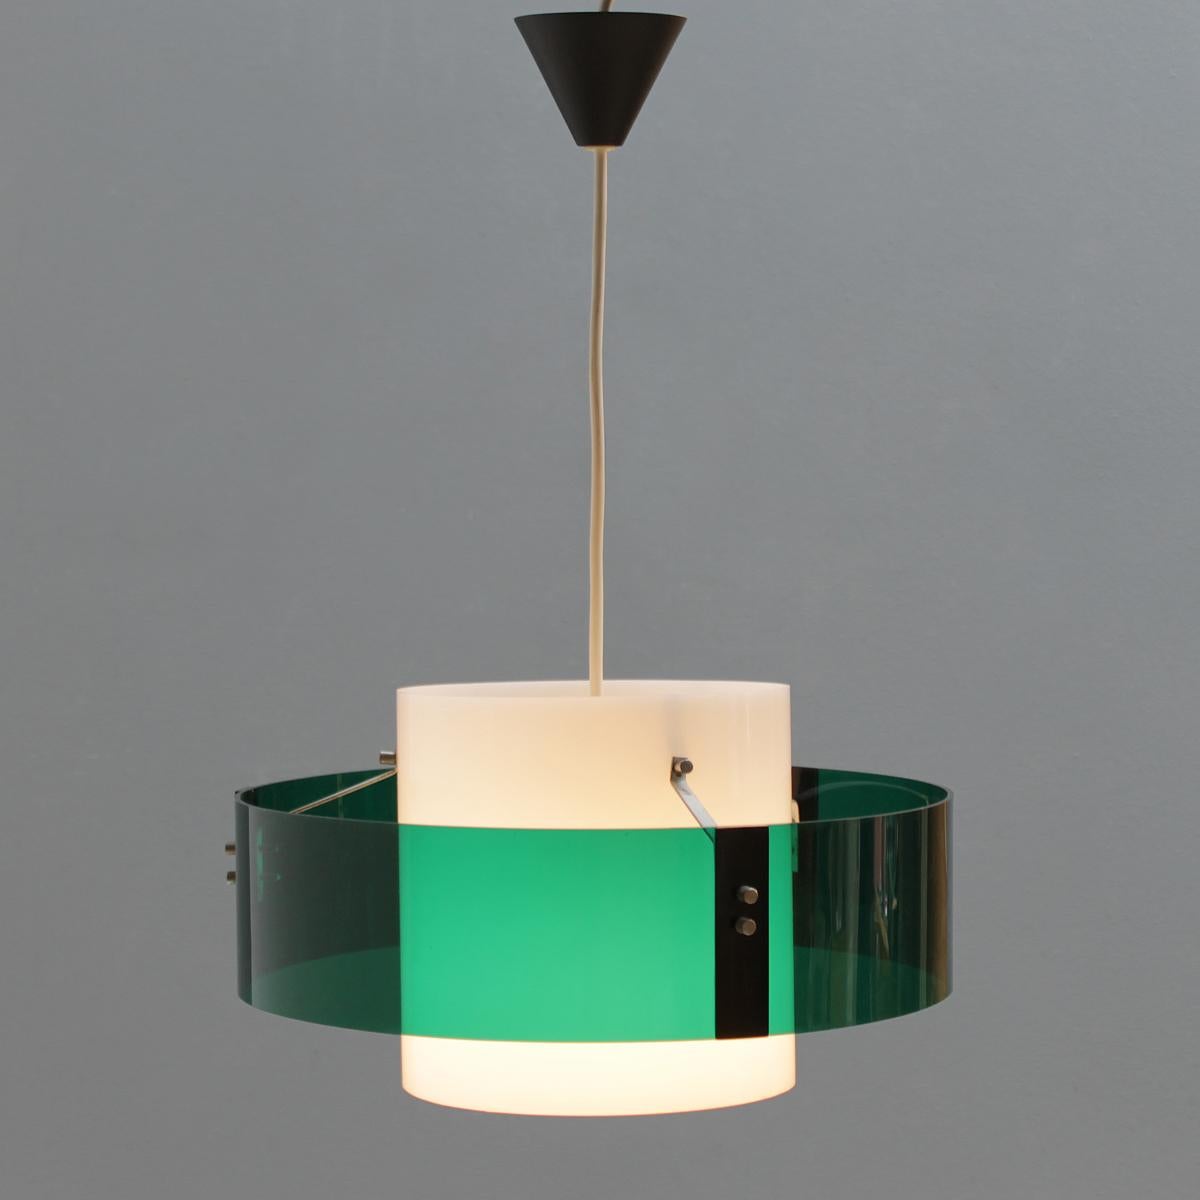 Rare modernist French pendant light. Green and white acrylic.
Dimensions: Diameter 13.8 inches (35 cm), Height 7.9 in. (20 cm), from ceiling till drop about 23.6 inches (60 cm).
One bulb E27/E26 of max 60 watt, the electricity is used but in a